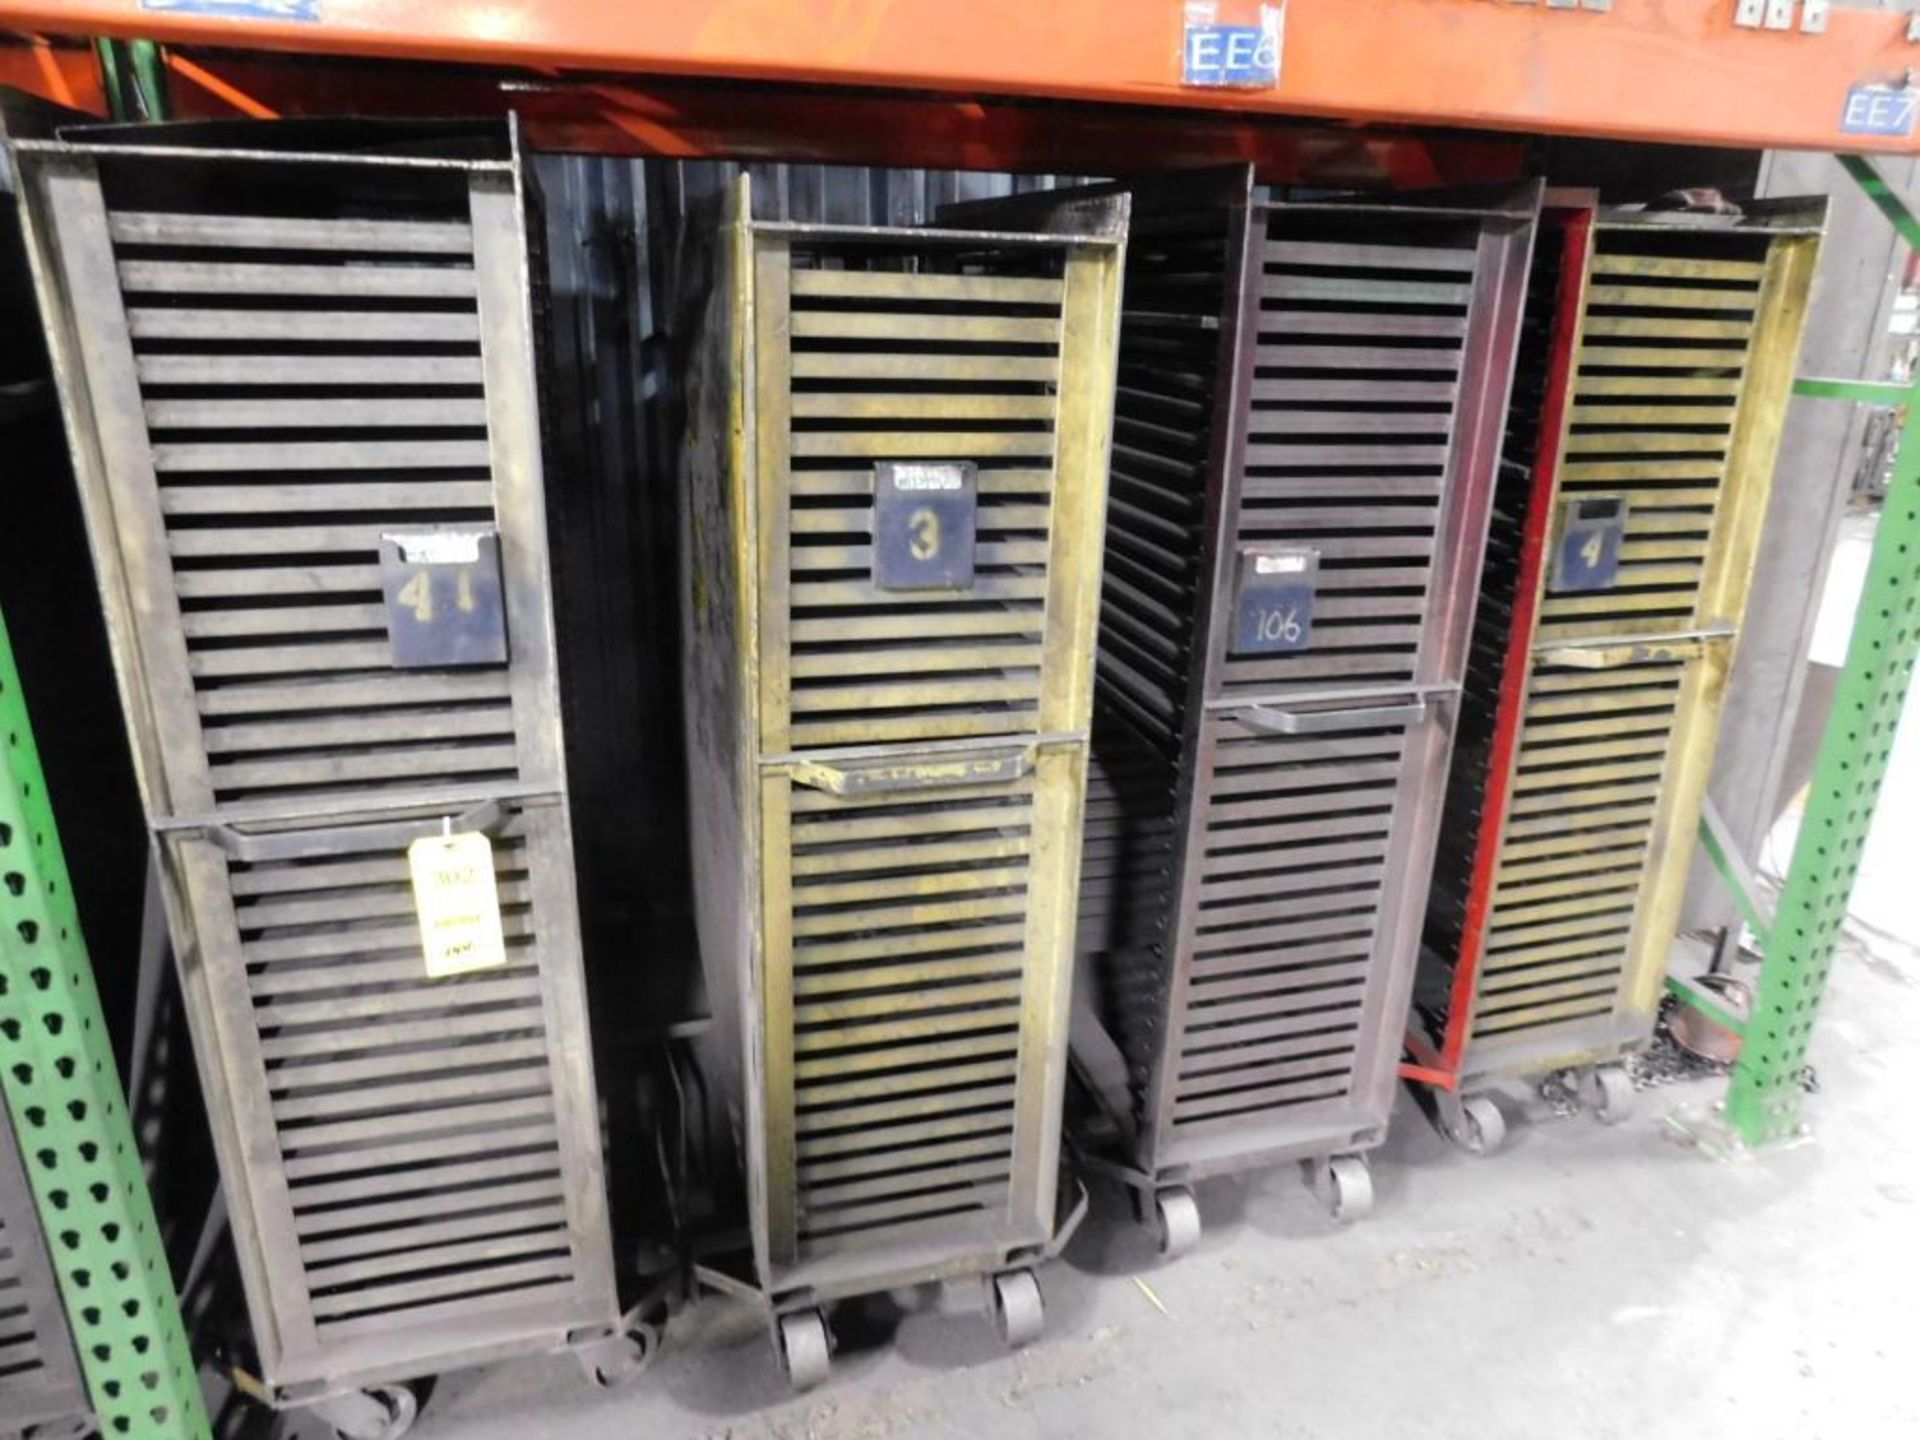 LOT: (4) Rolling Steel Parts Tray Carts, 65" x 17" at top, 65" x 23" at bottom, 64" tall